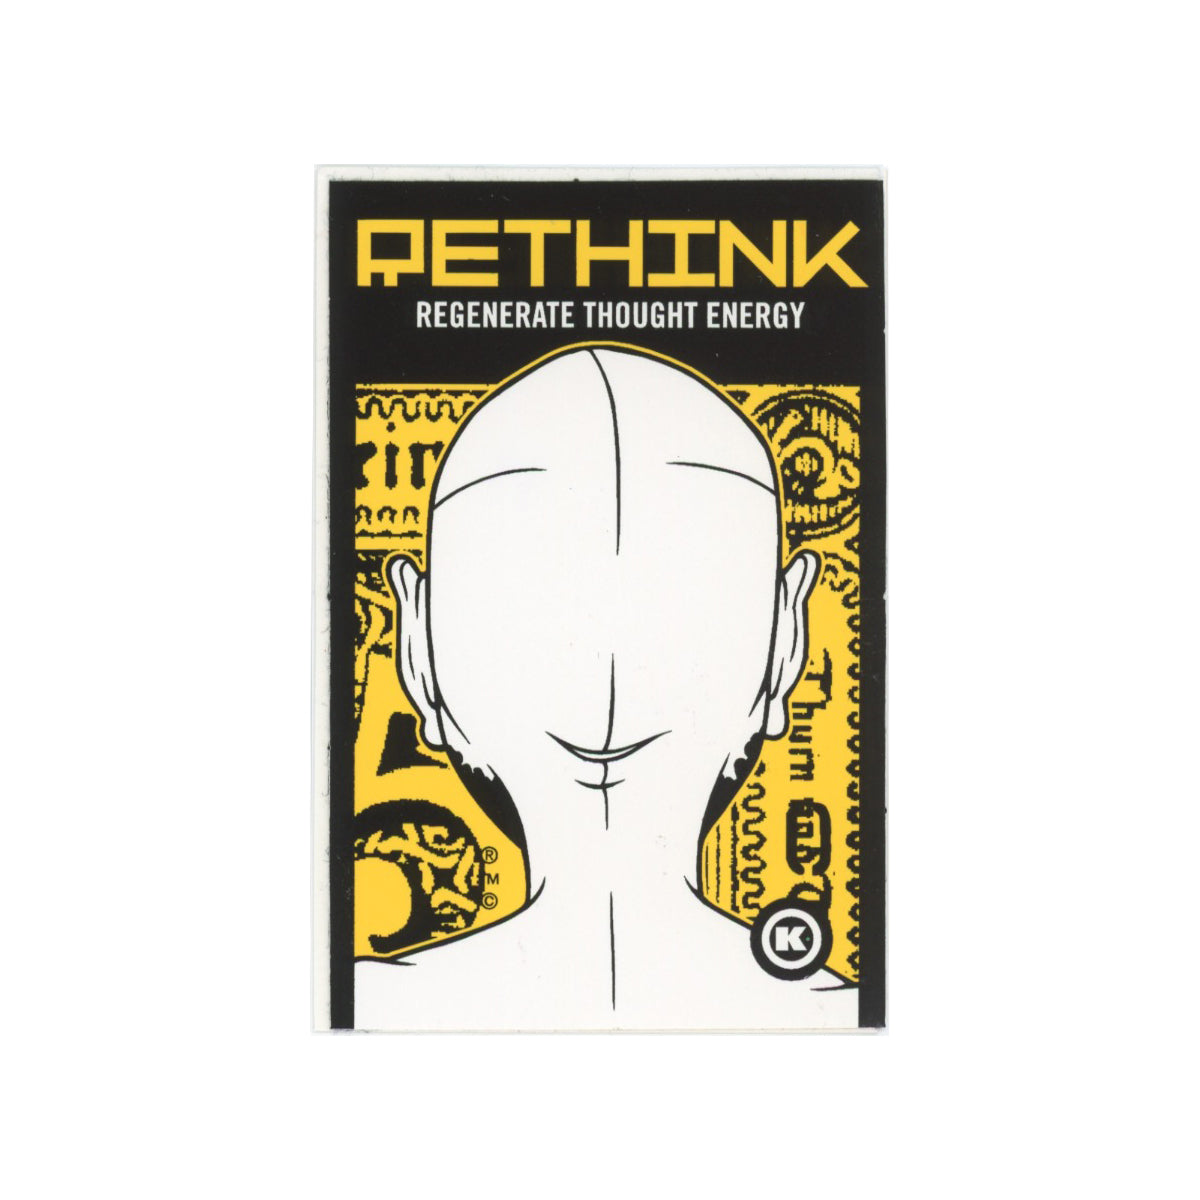 Dave Kinsey RETHINK Regenerate Thought Energy Yellow Black Sticker